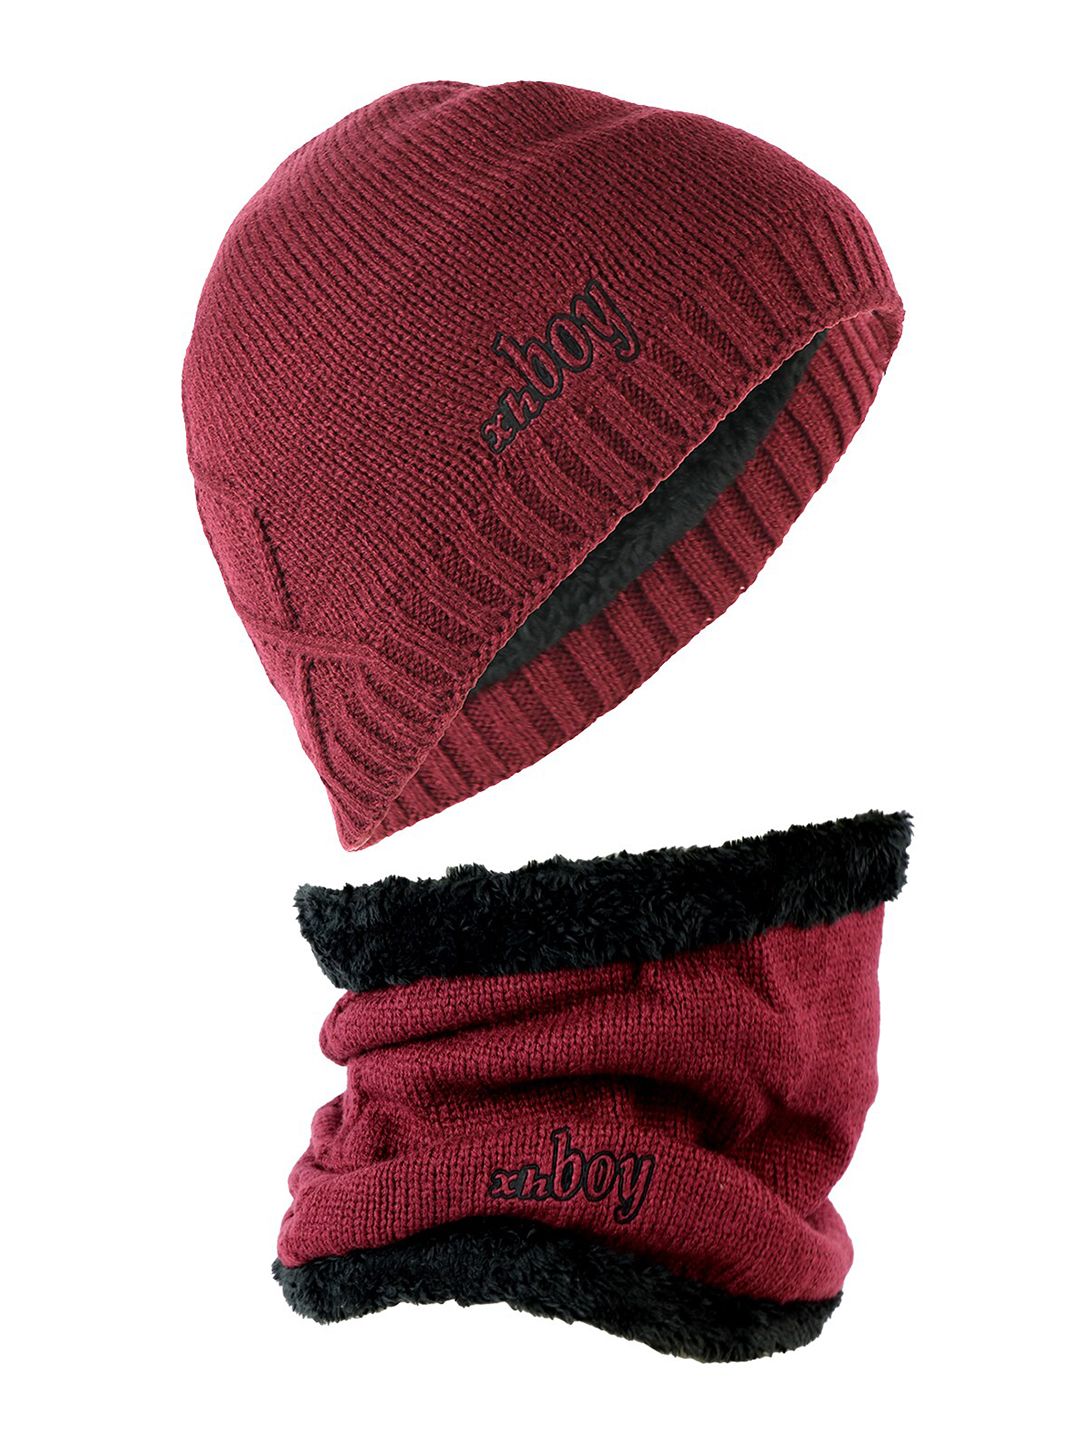 iSWEVEN Unisex Maroon & Black Embroidered Beanie Price in India